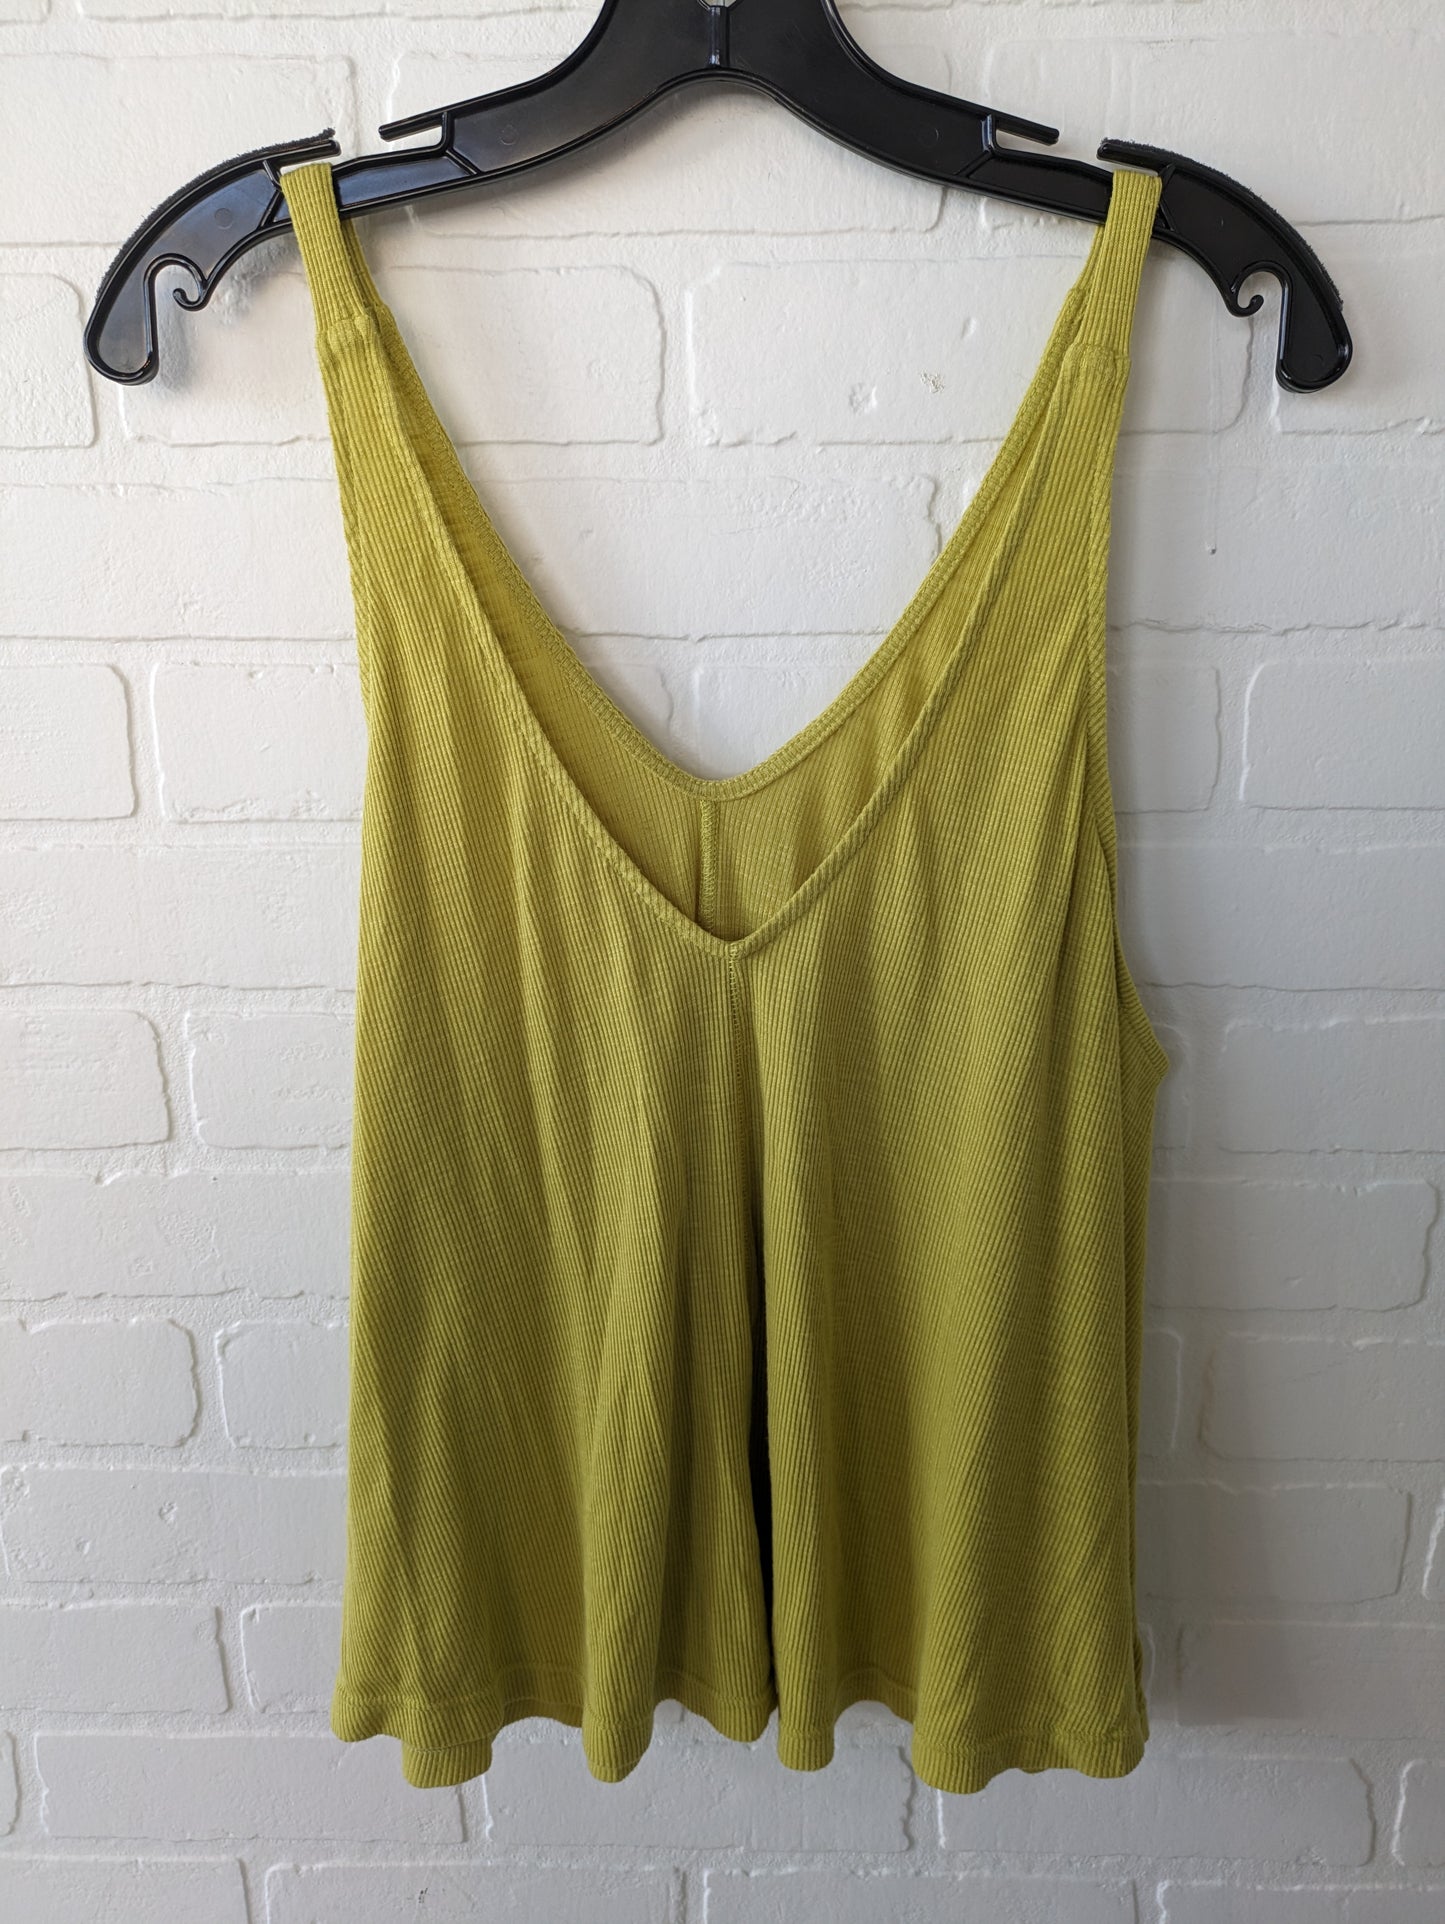 Top Sleeveless Basic By Free People  Size: M